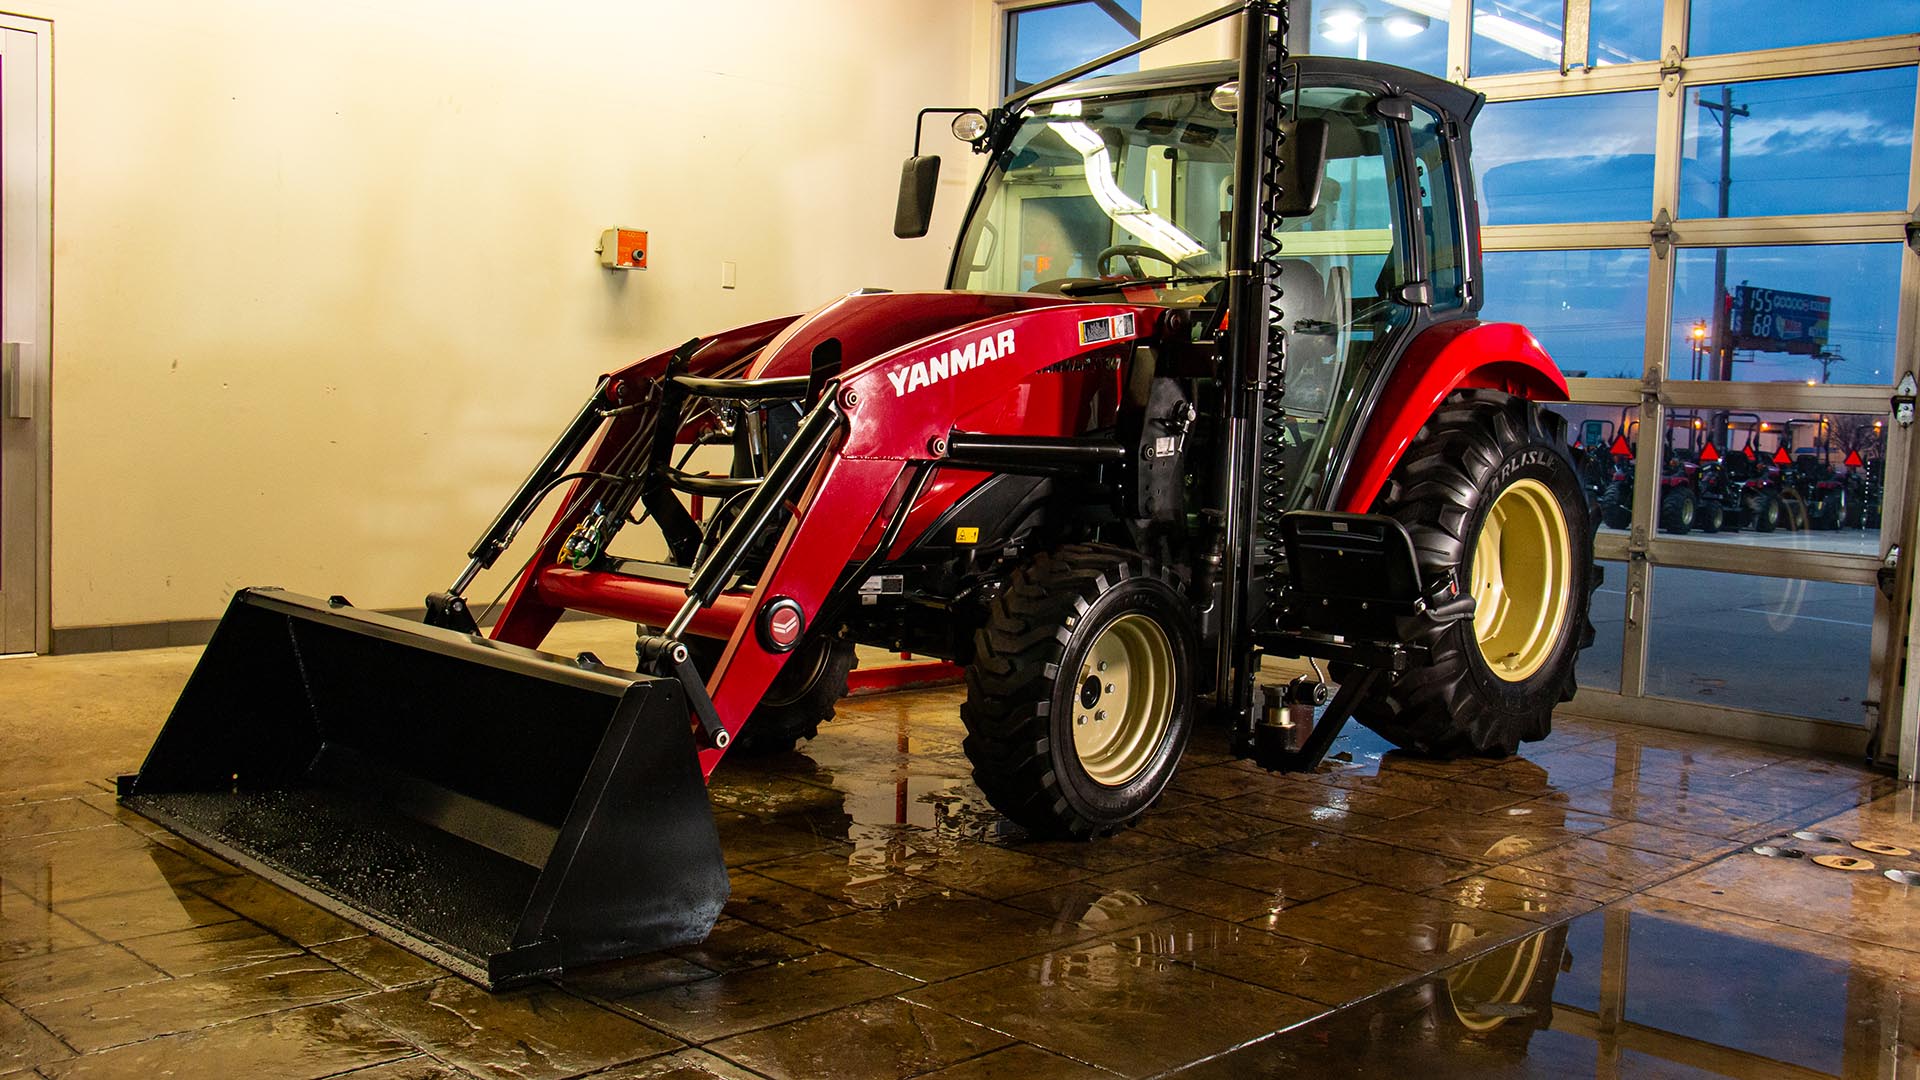 Yanmar America Dealer Tractor Bob’s has devised a tractor conversion for wheelchair access.